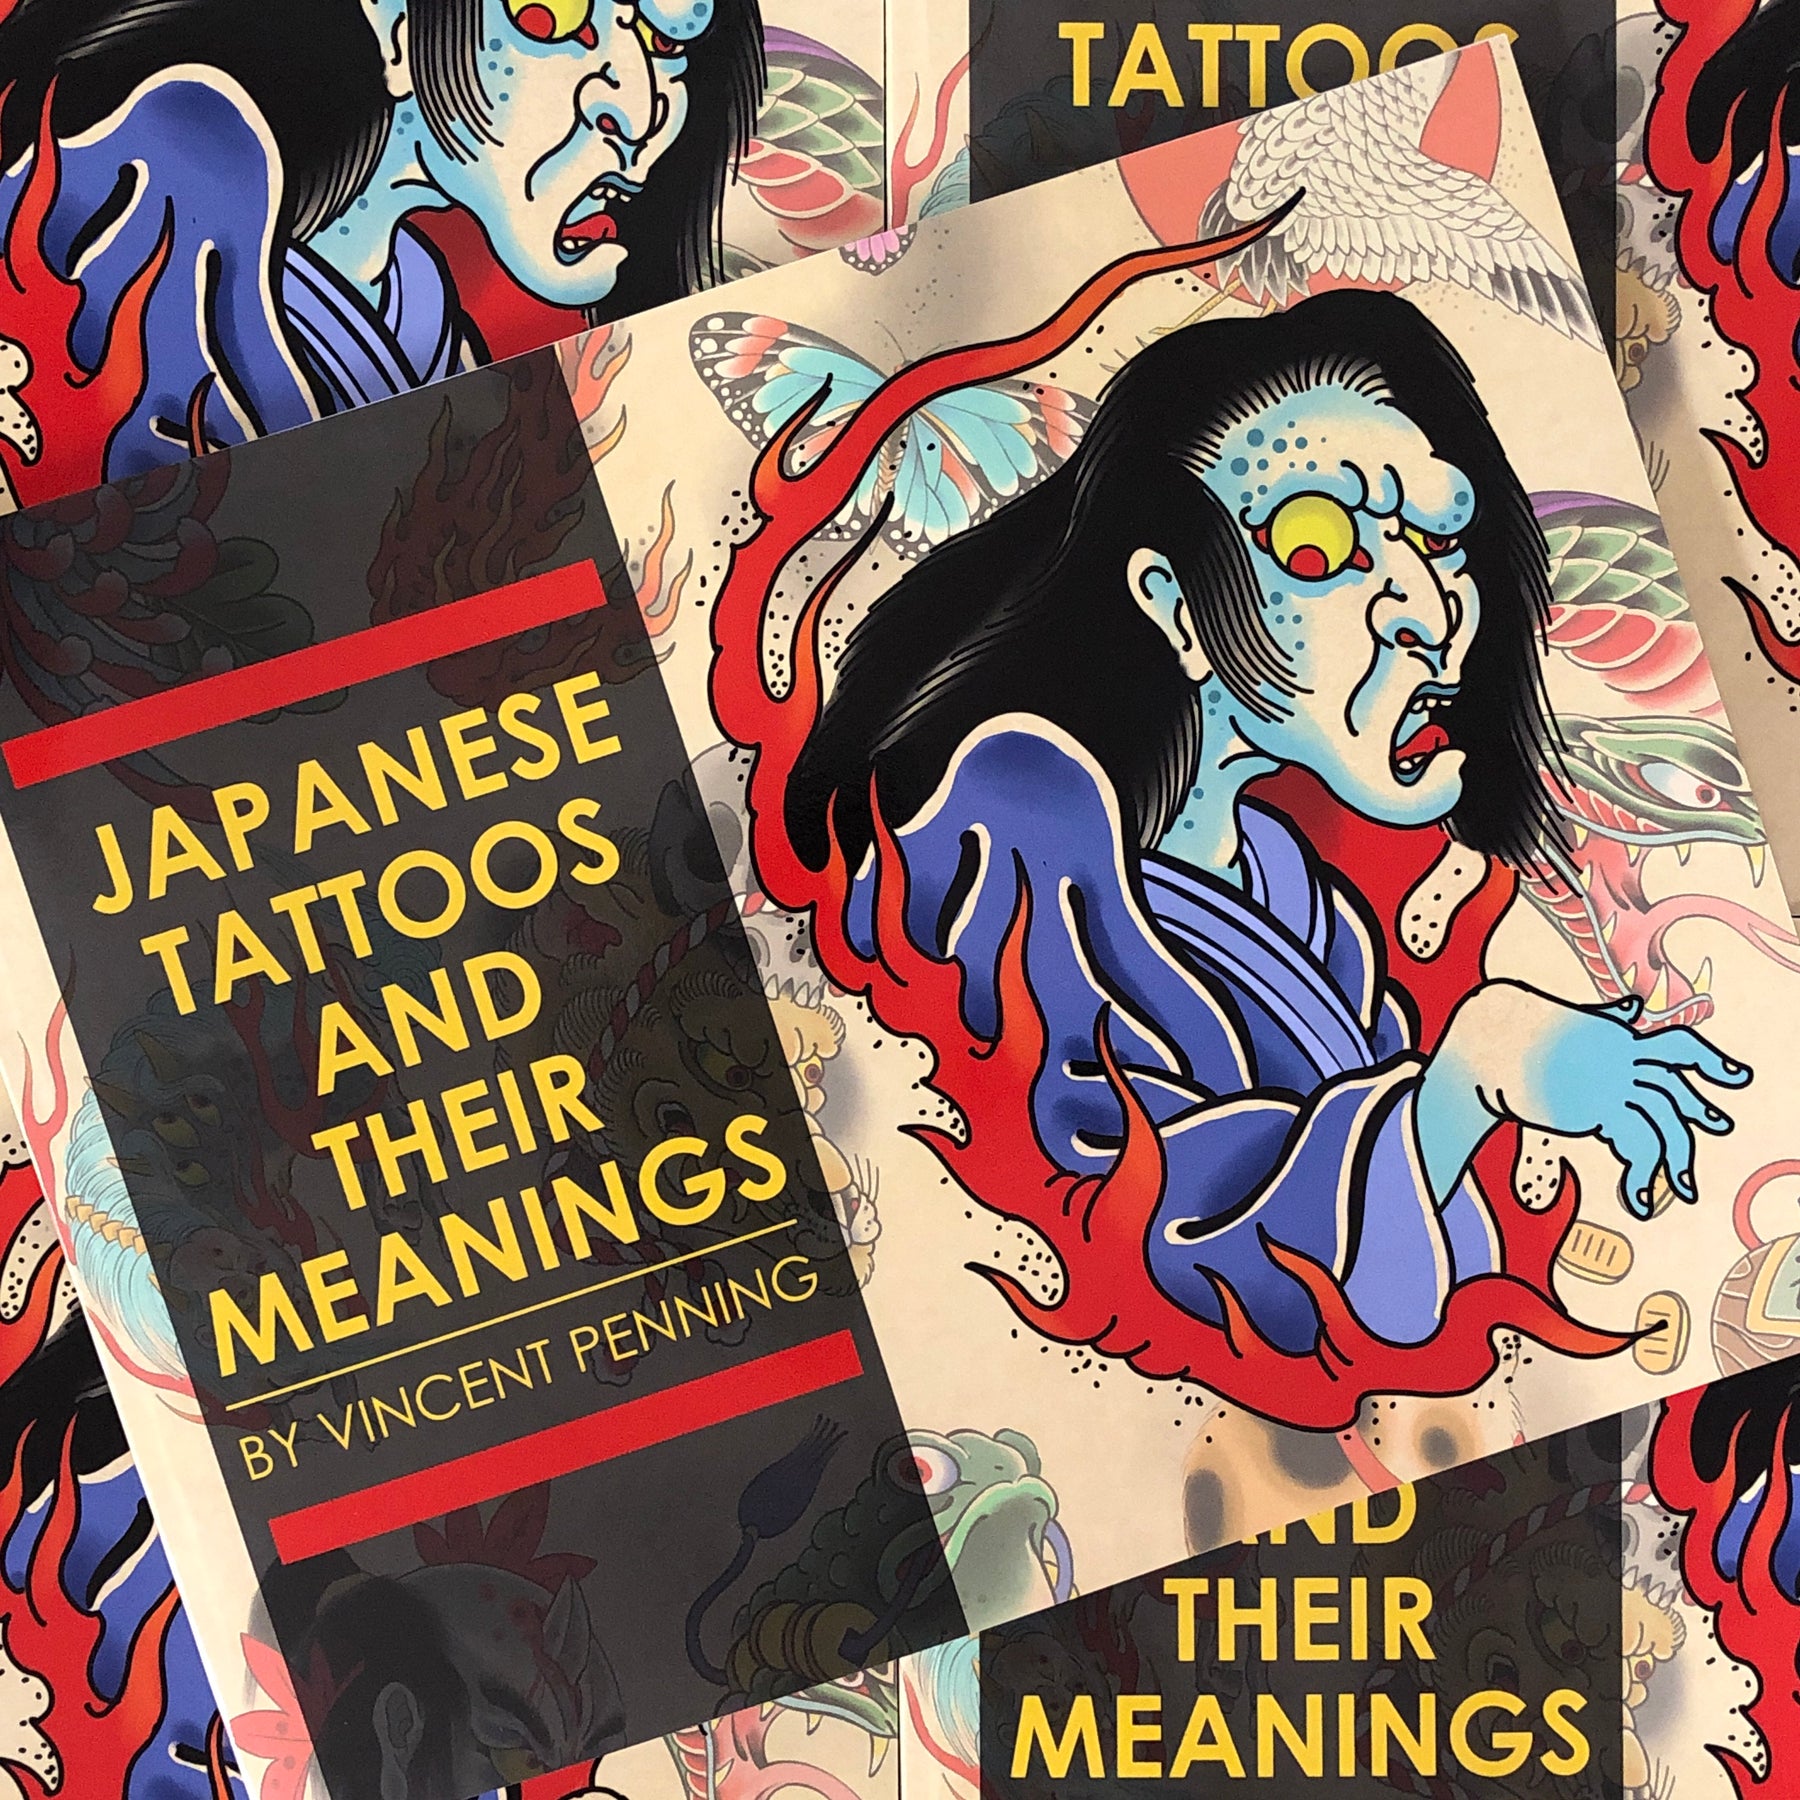 Traditional Chinese Koi Carp Blessing Irezumi Japanese Tattooing Book With  Beautiful Pattern Design Top Manuscript For Body Artists 231012 From Bao04,  $11.34 | DHgate.Com